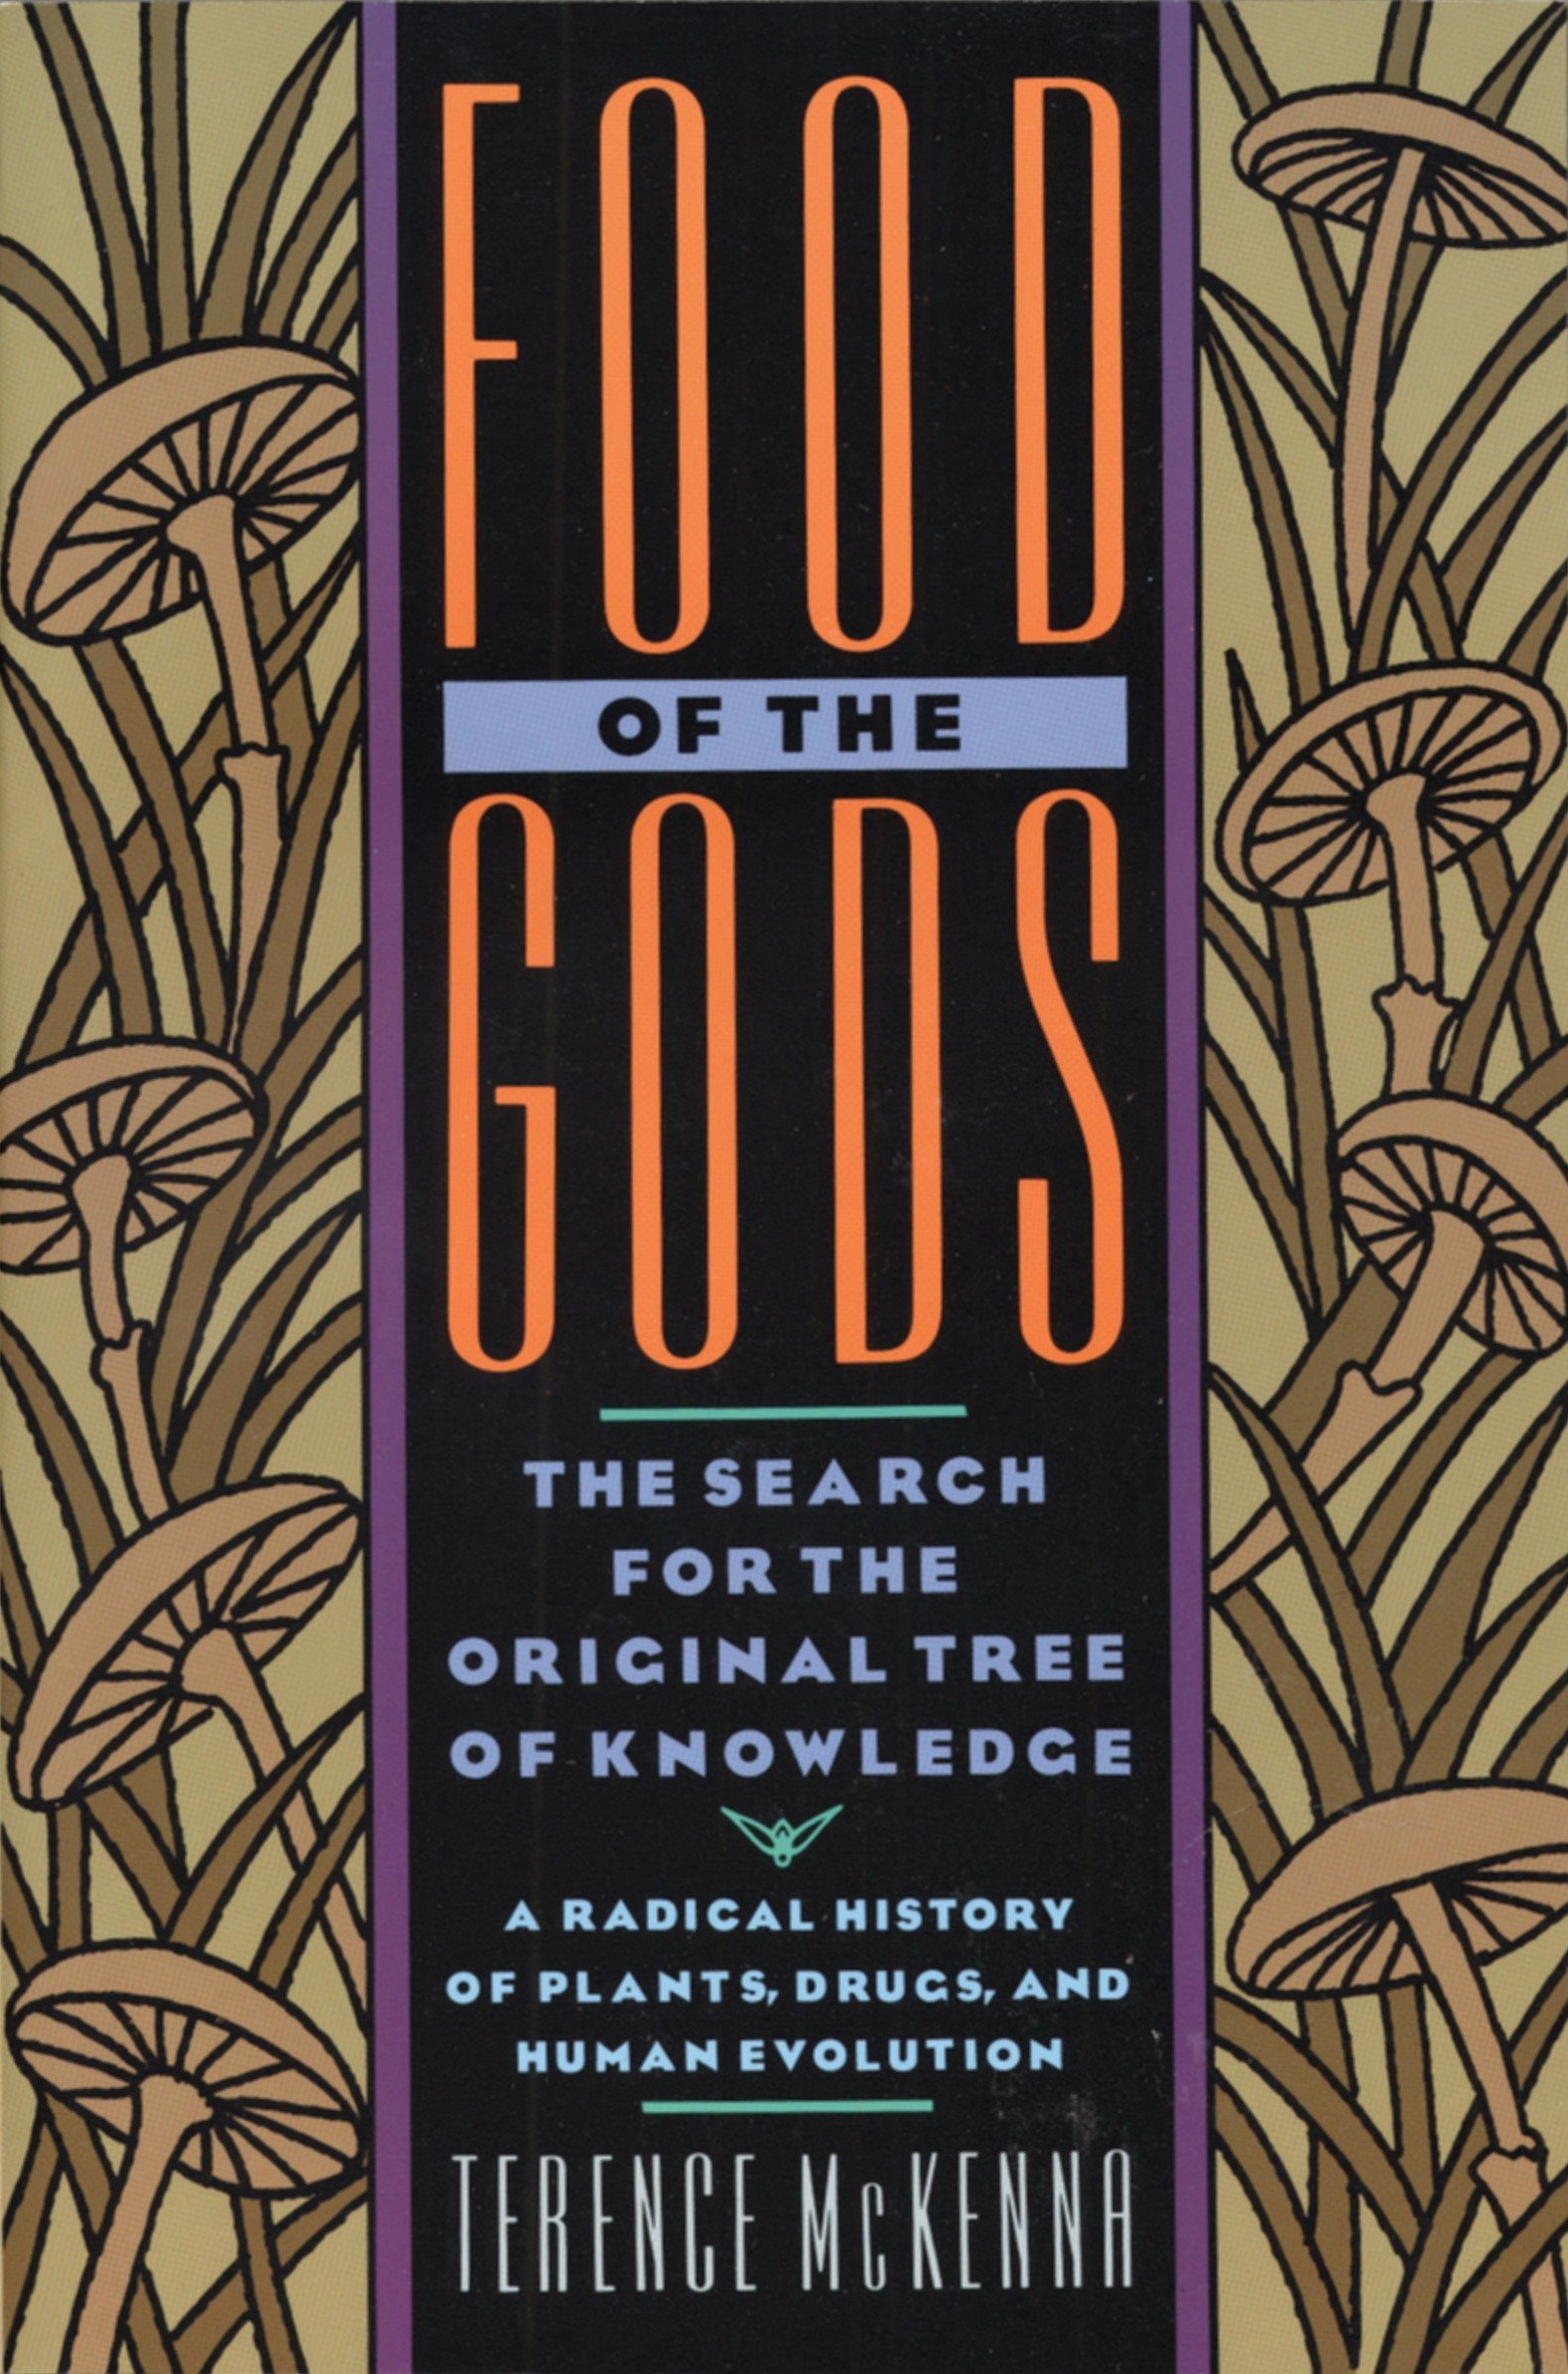 Food of the Gods - by Terence McKenna